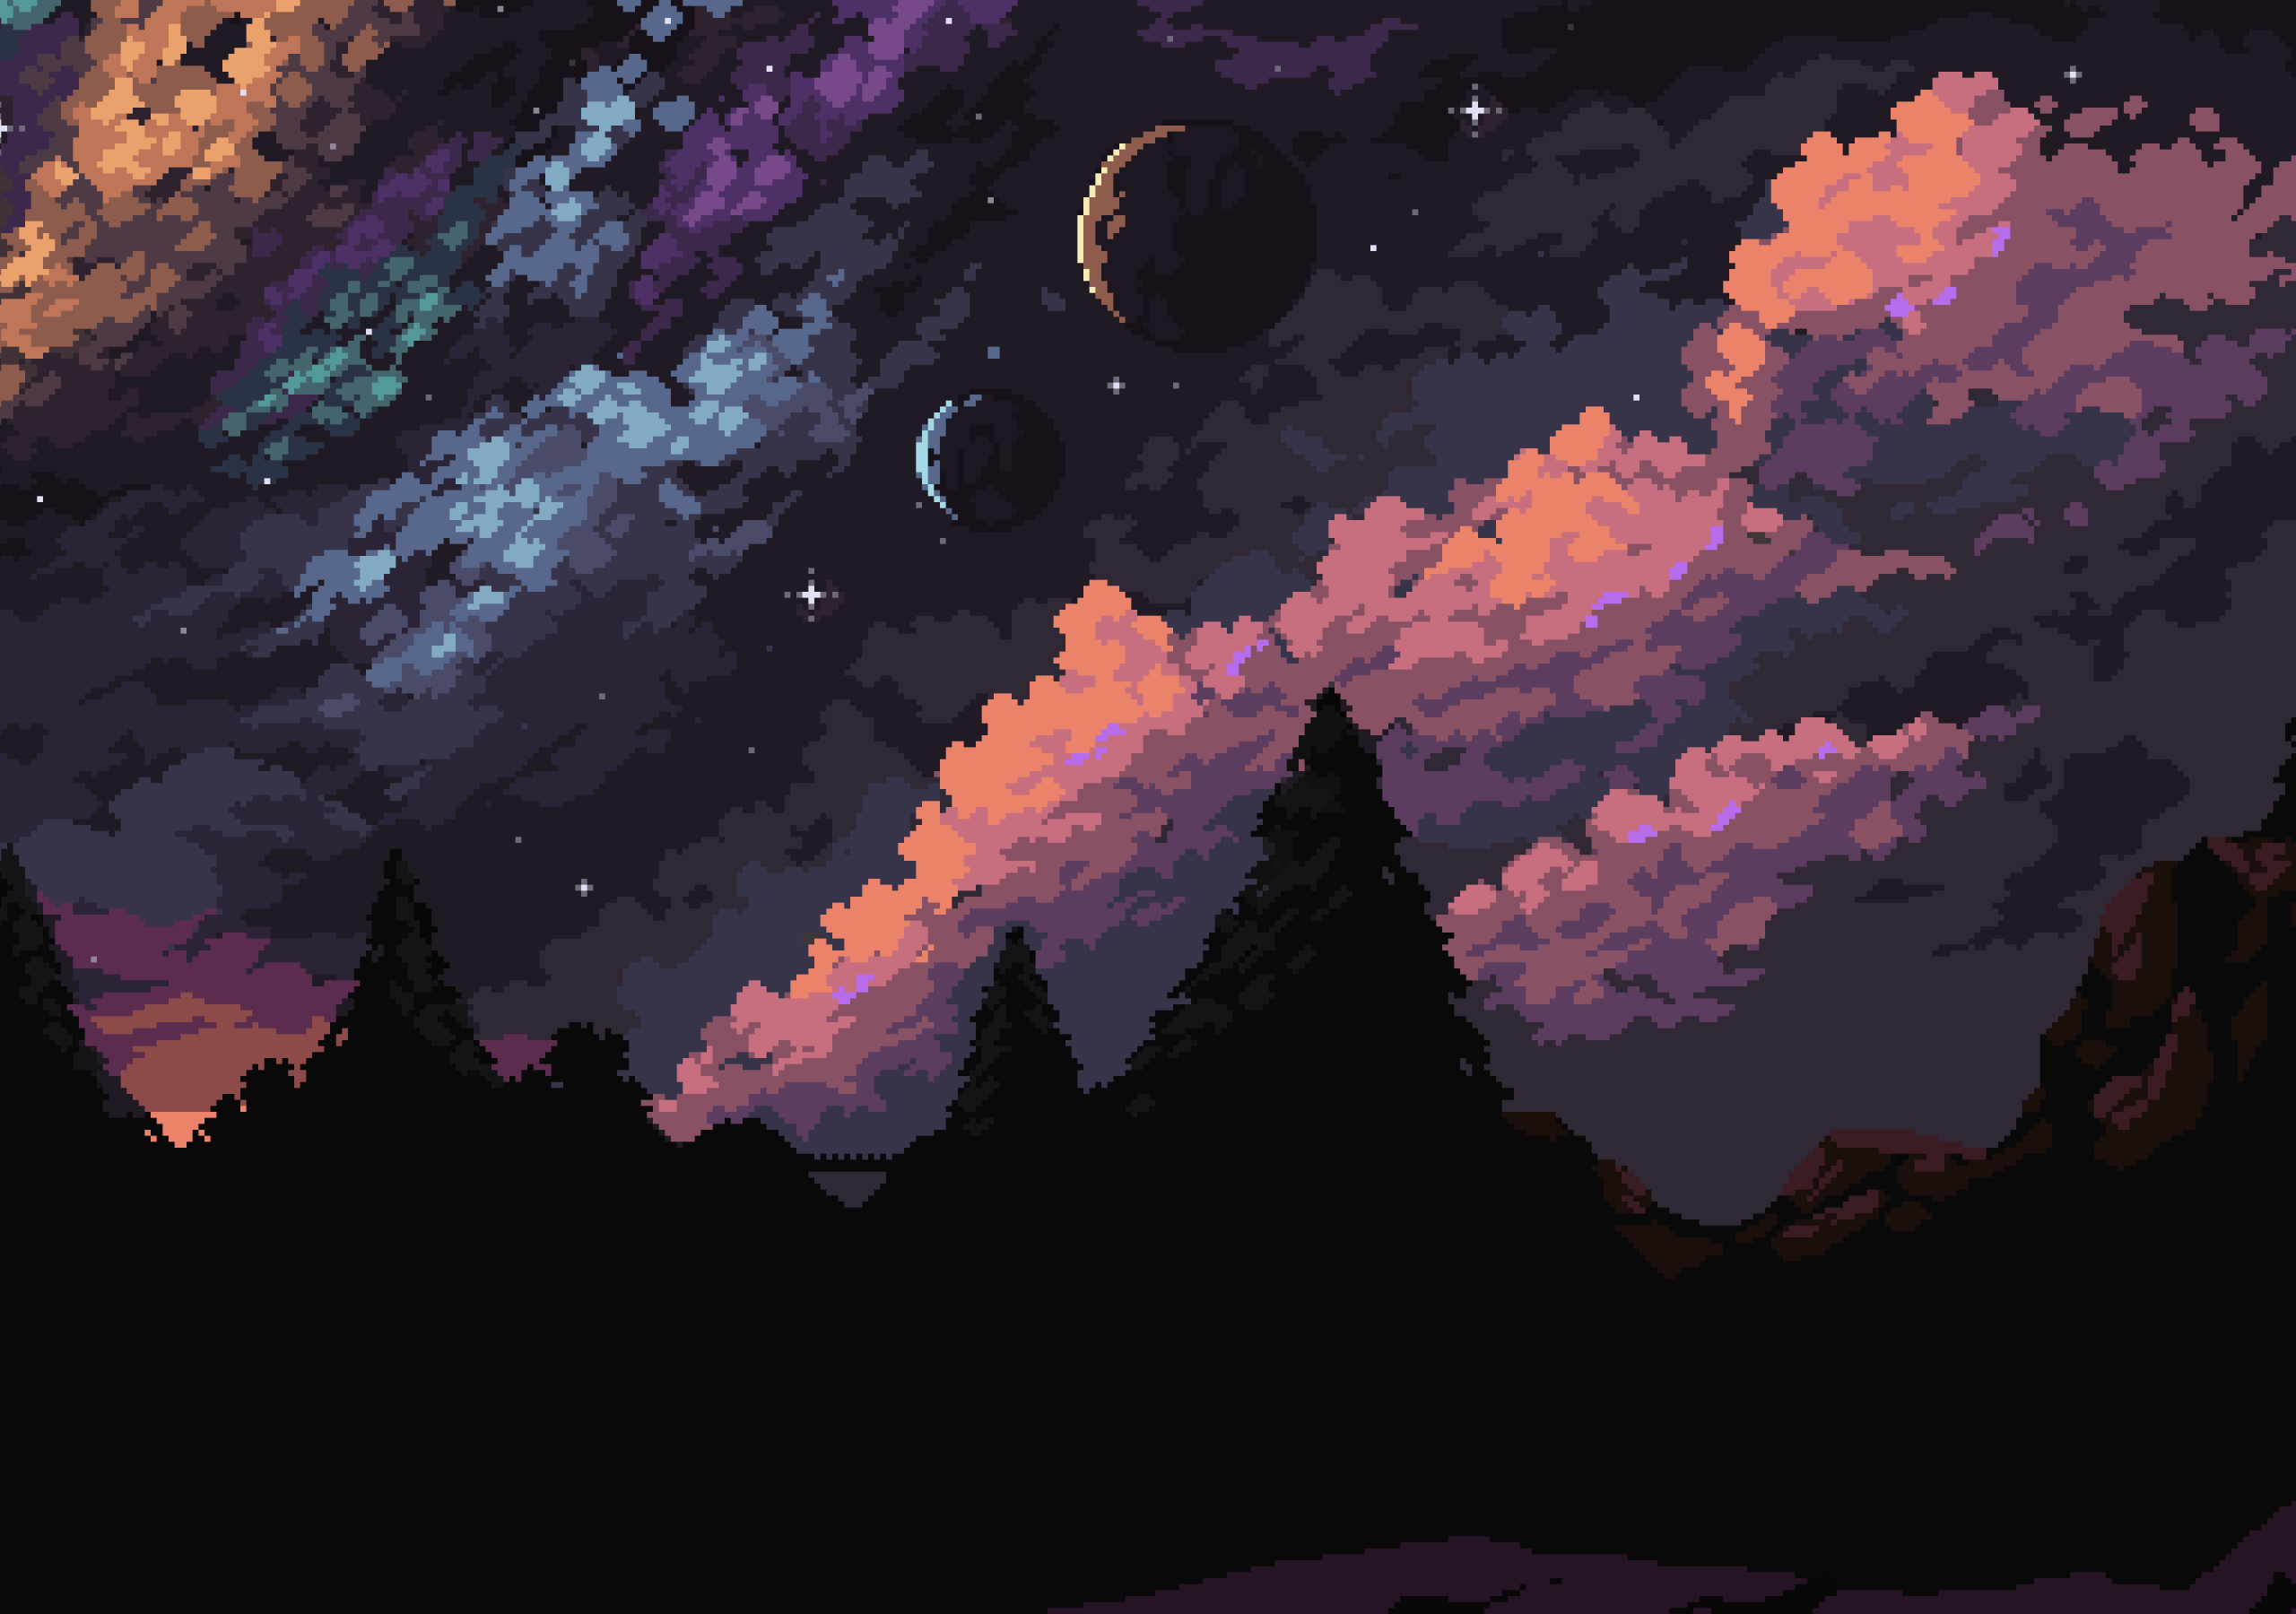 A painting of the night sky with clouds and trees - Pixel art